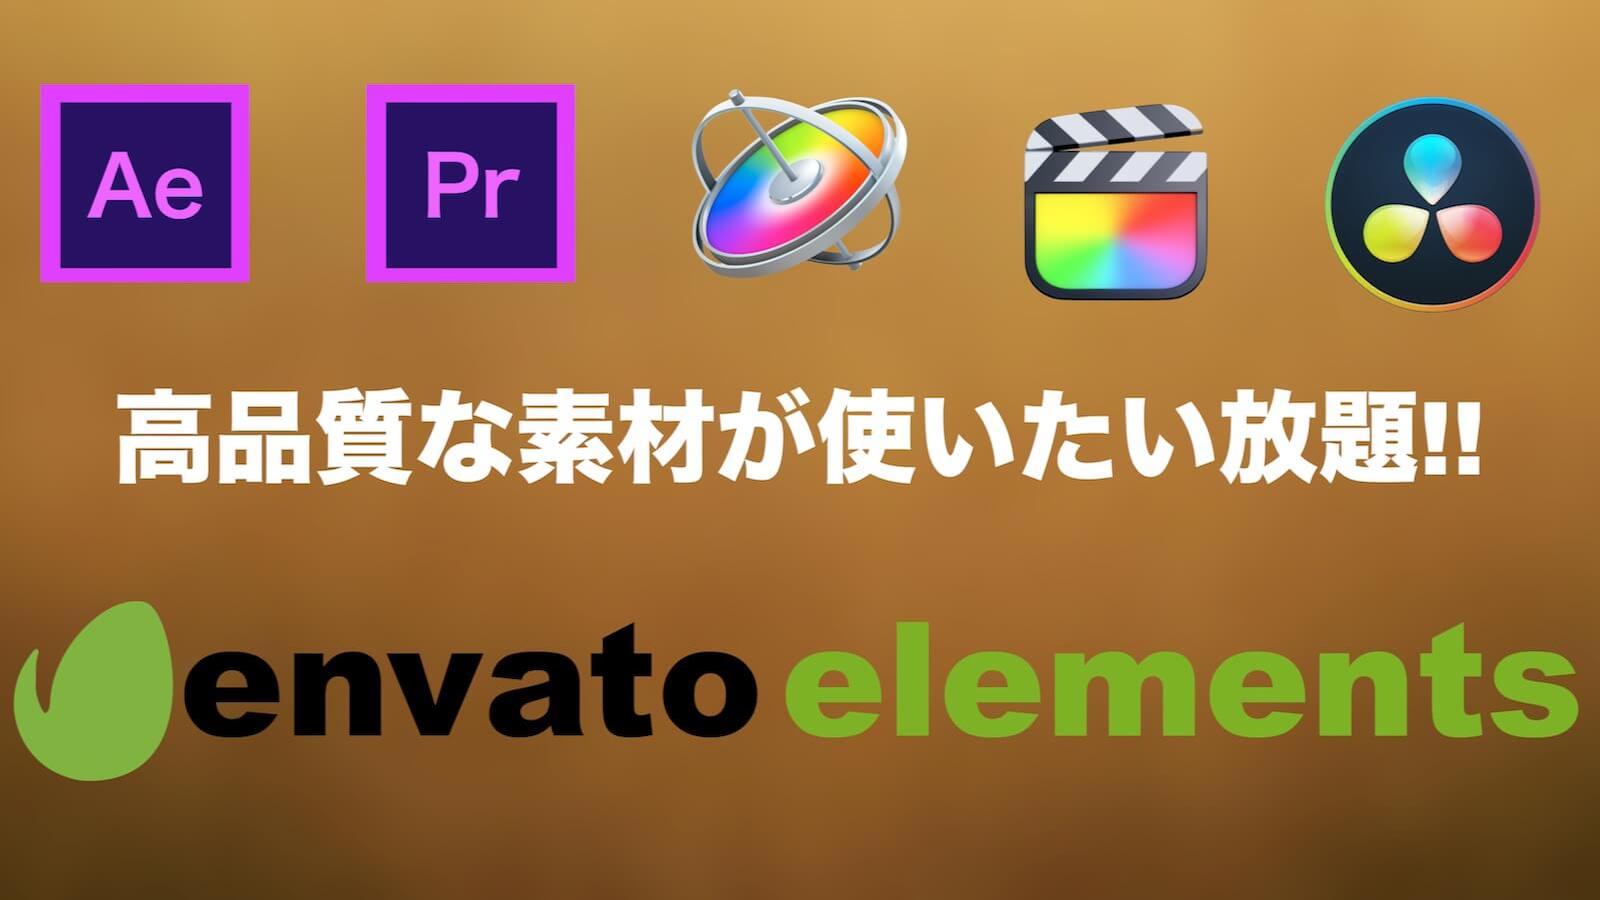 0247 Thorough explanation of how to use EnvatoElements in Japanese 01